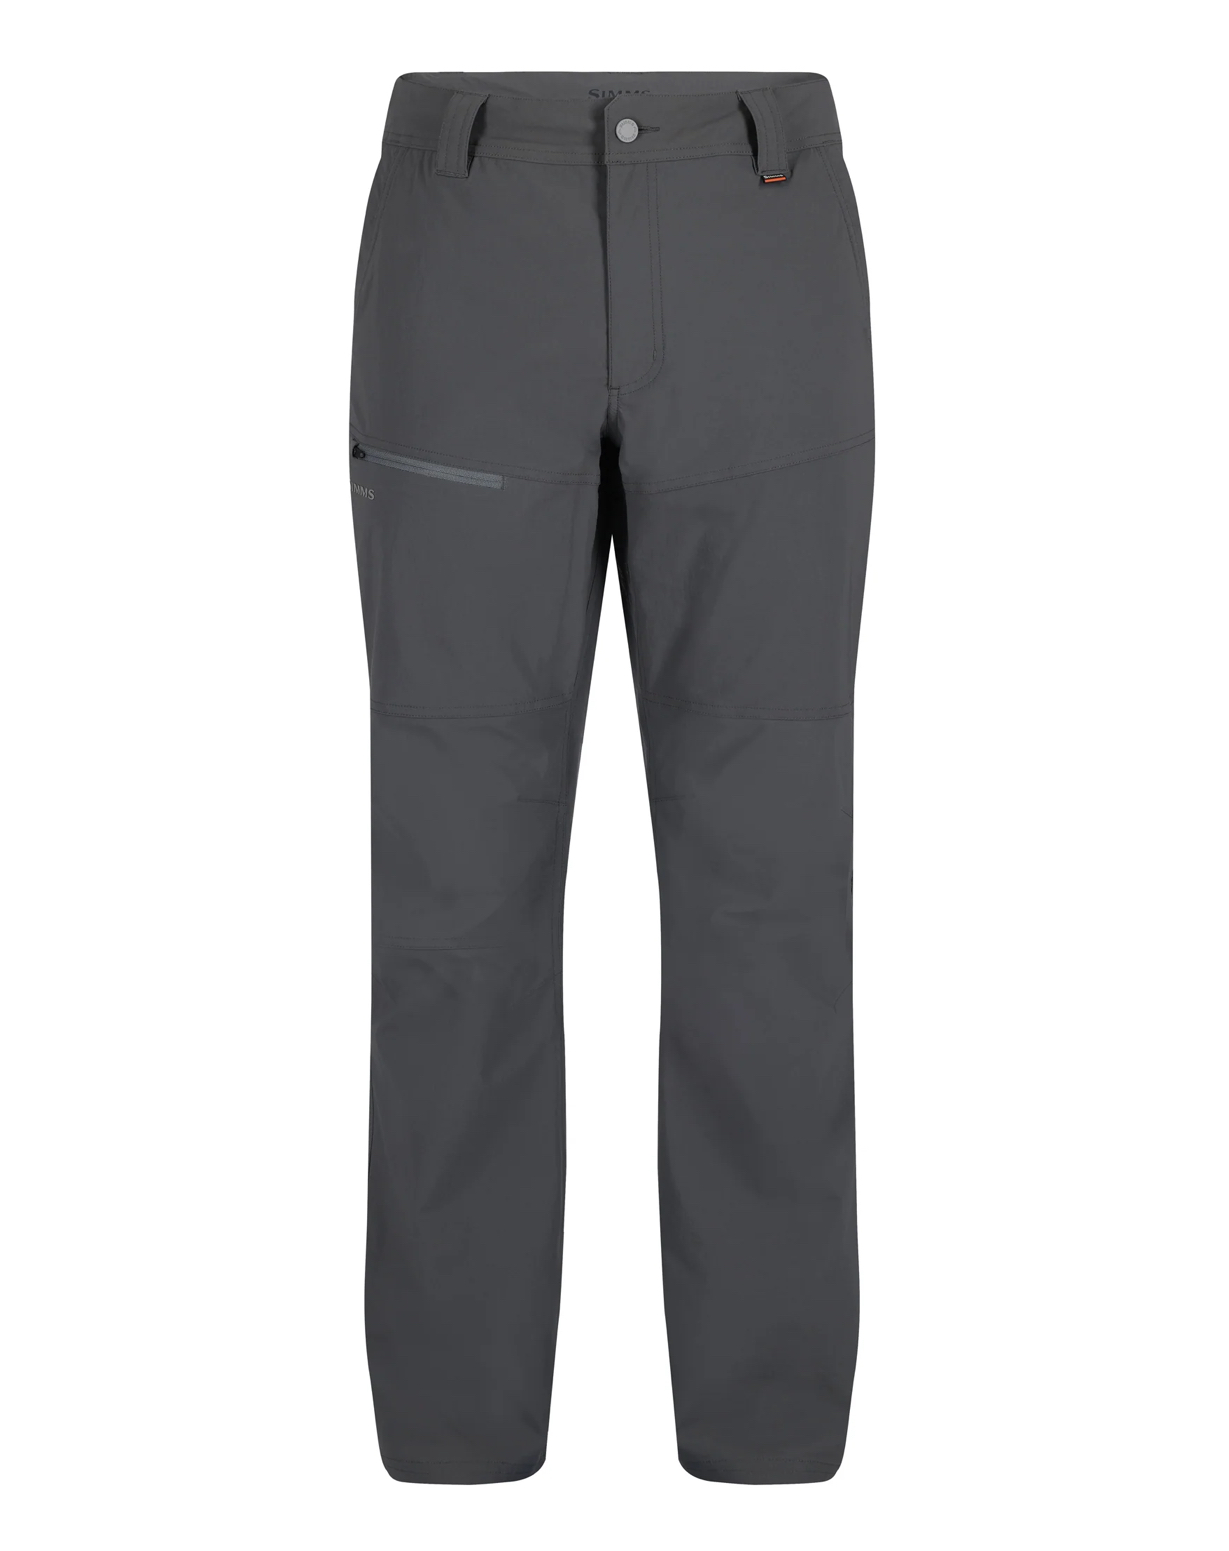 Simms M's Guide Pant - Slate - XXL (last years version)